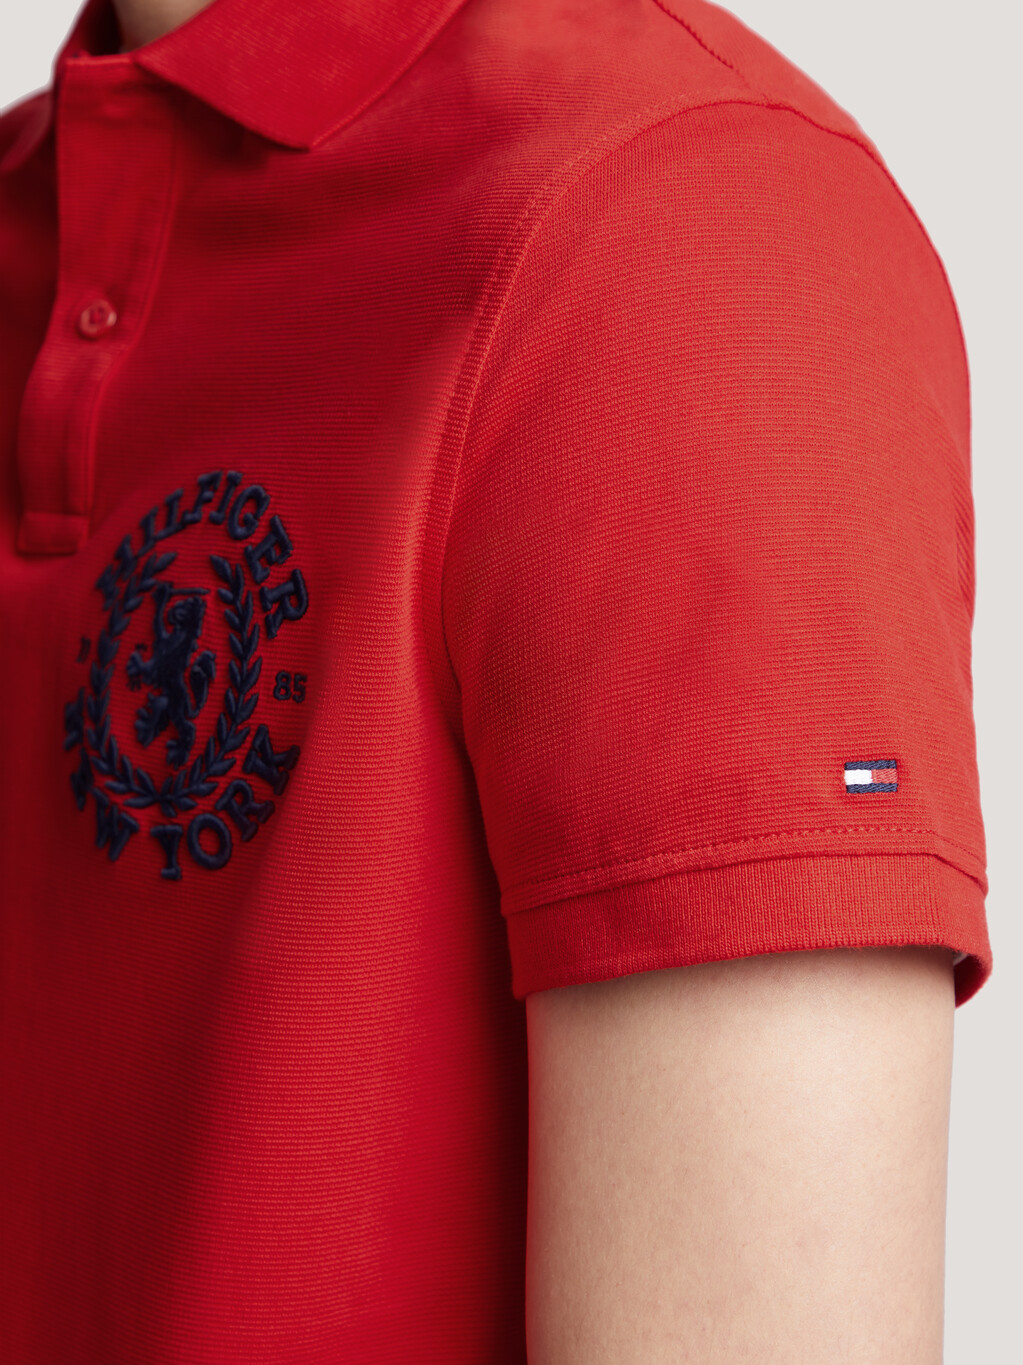 TH Crest Polo, Fierce Red, hi-res